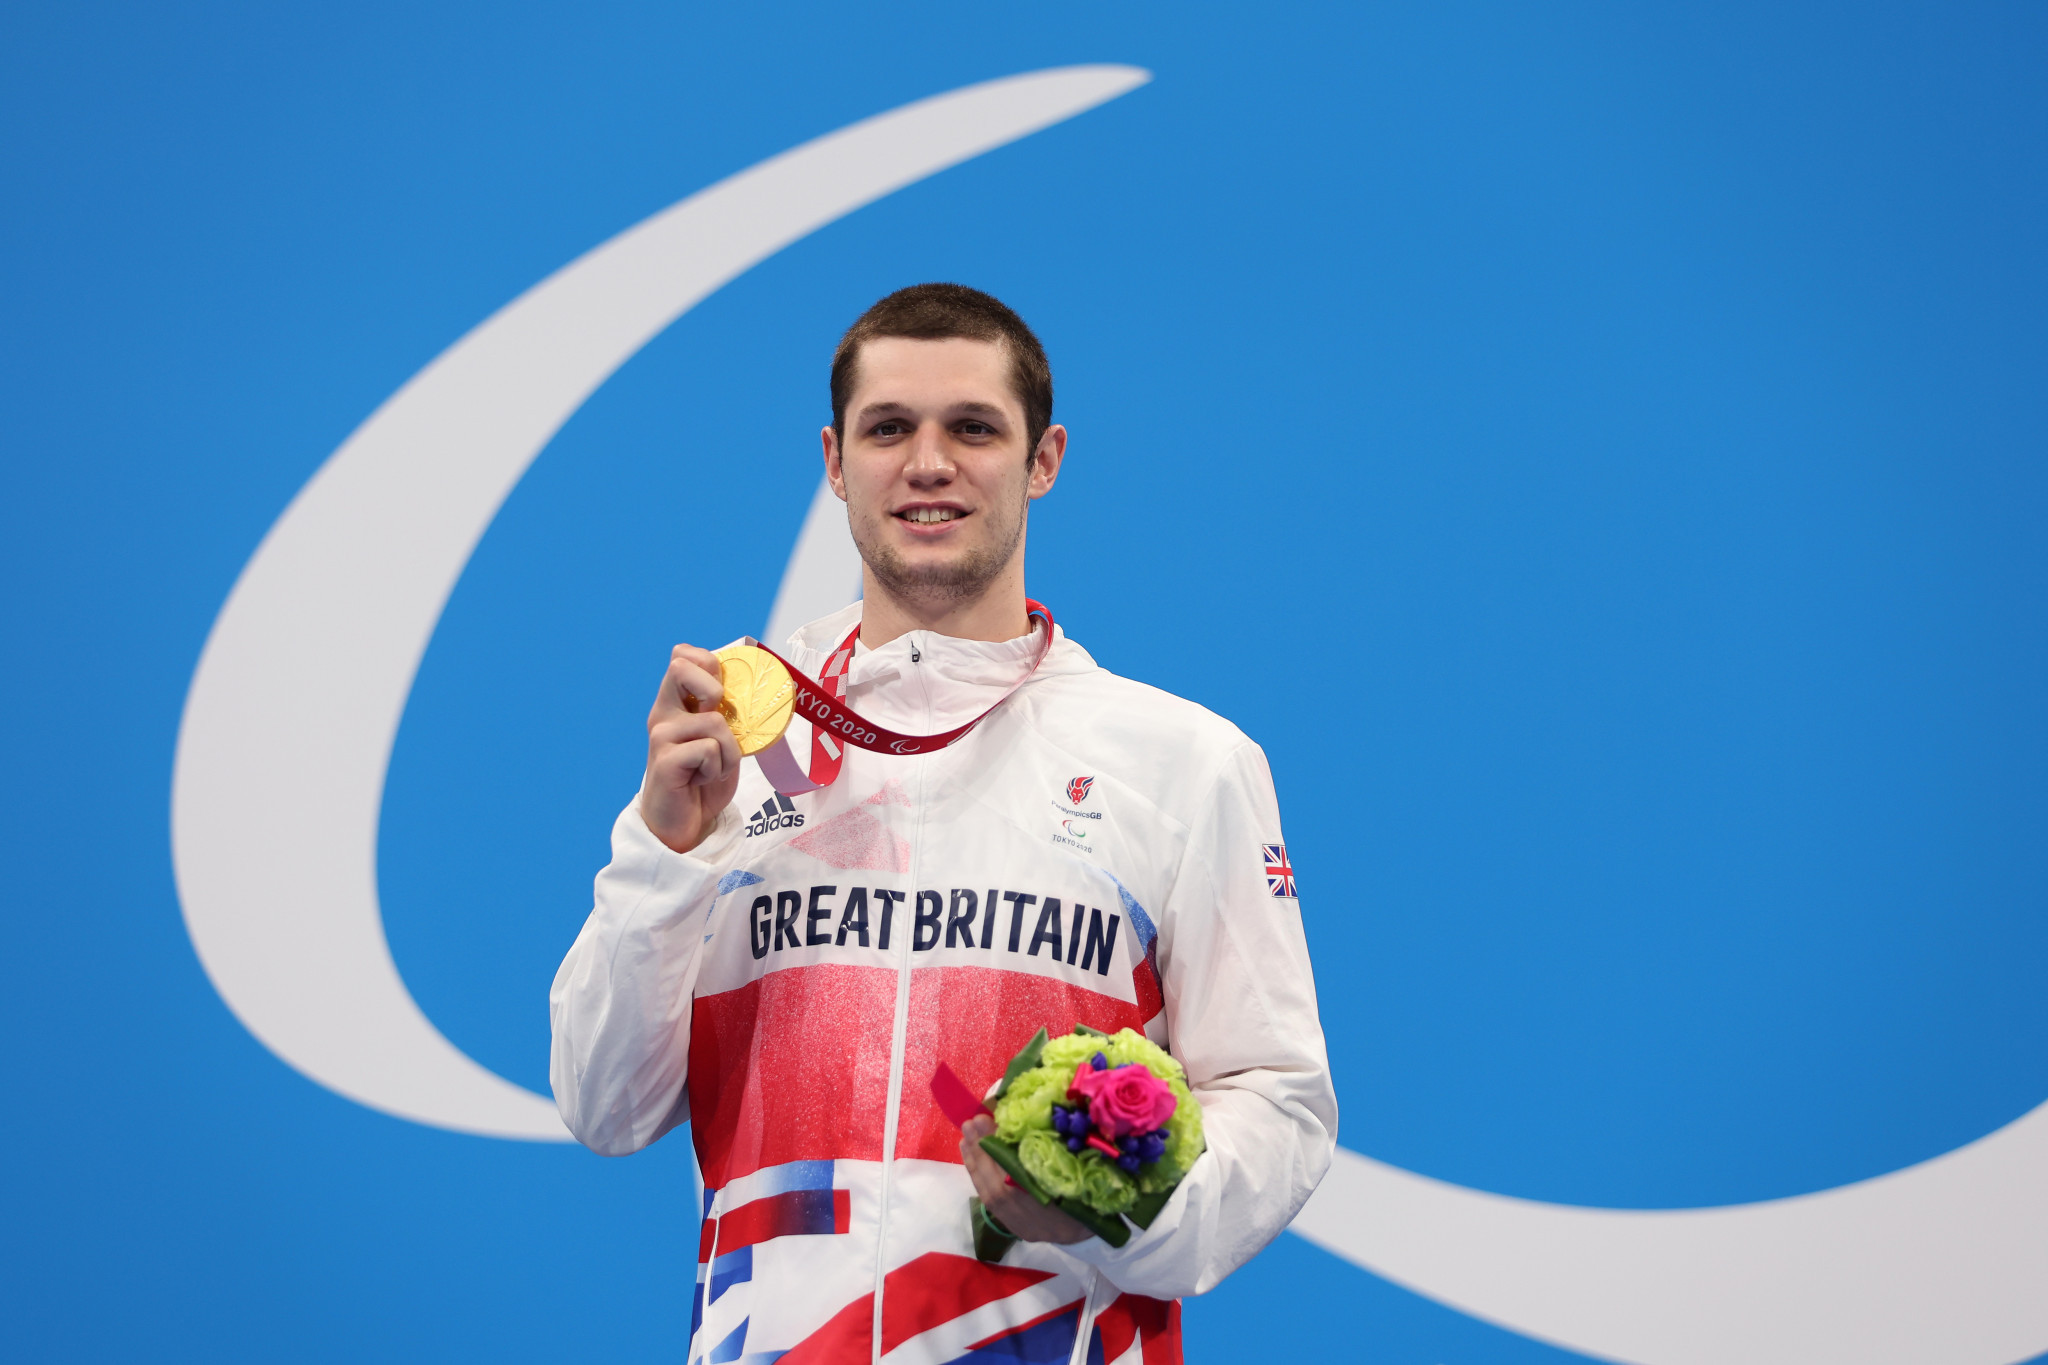 Reece Dunn participated in the Para Swimming World Series last year ©Getty Images